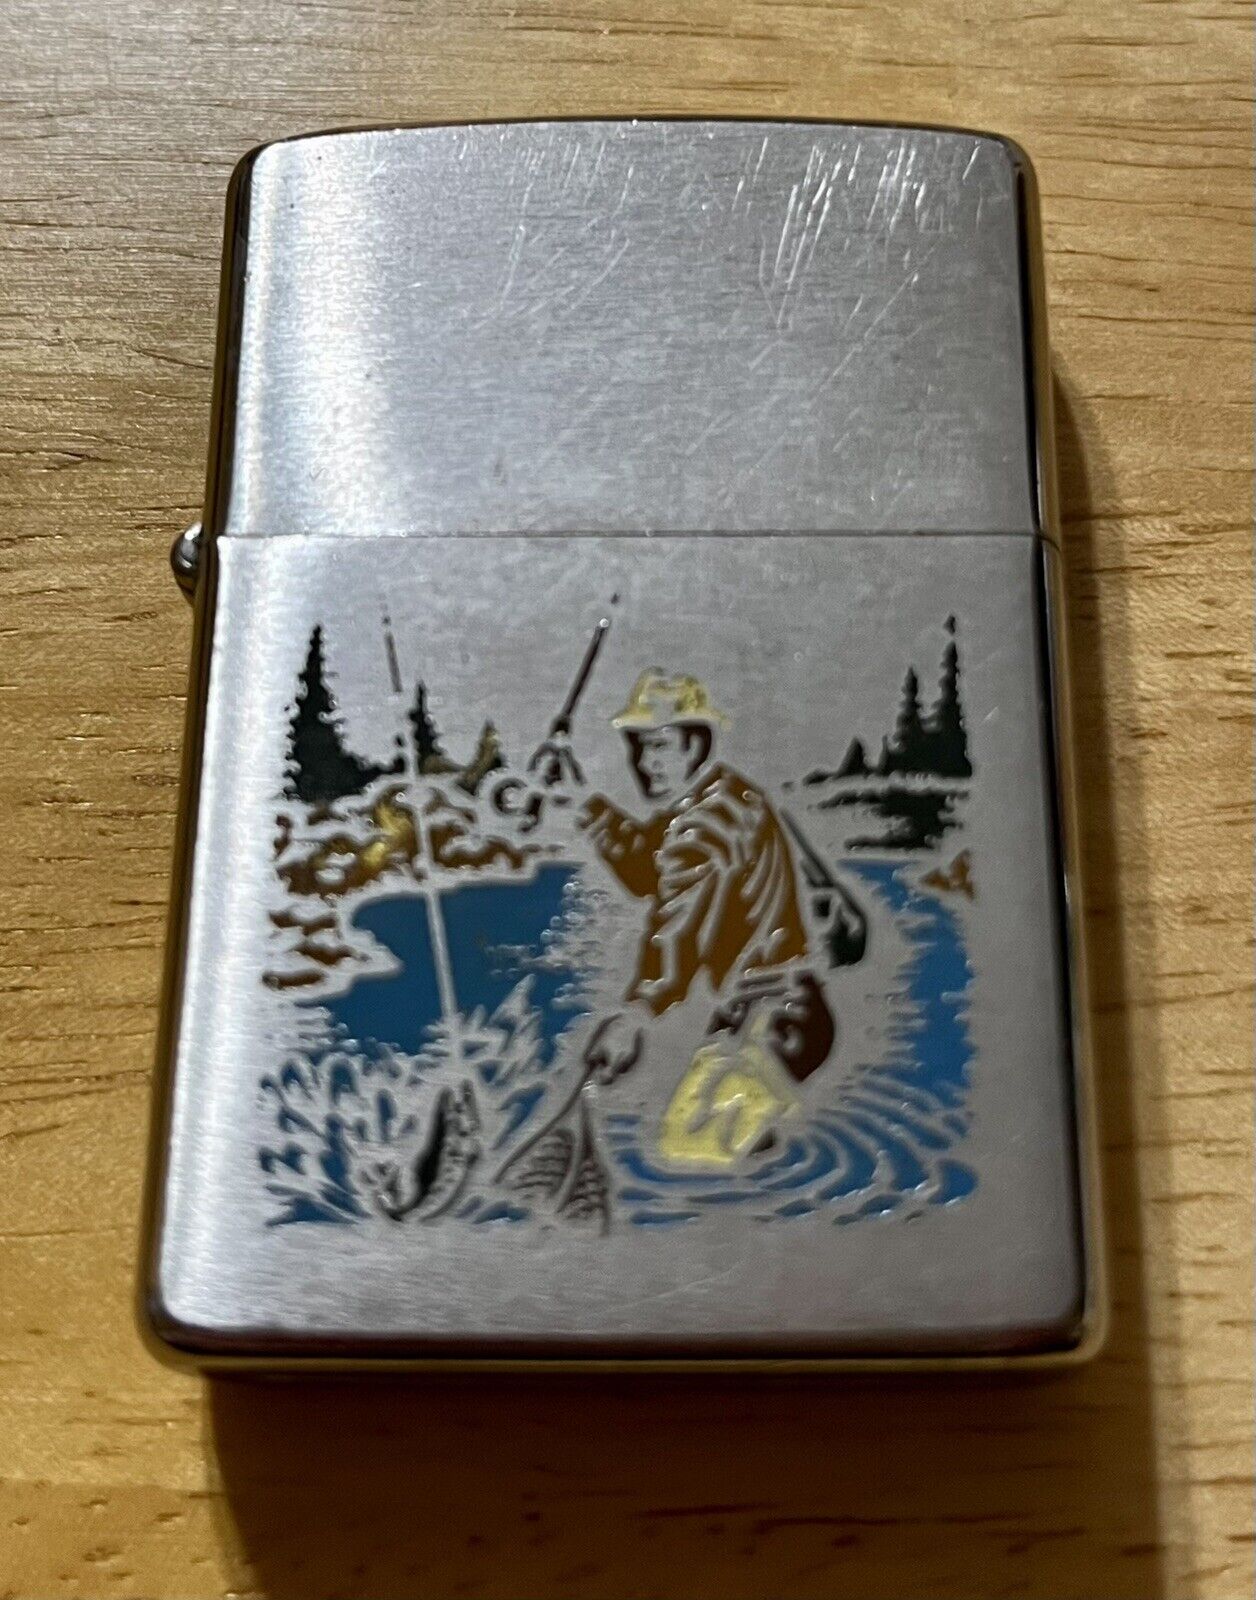 RARE Vintage Zippo Lighter Fisherman 70s? Engraved Pre-Owned GUC